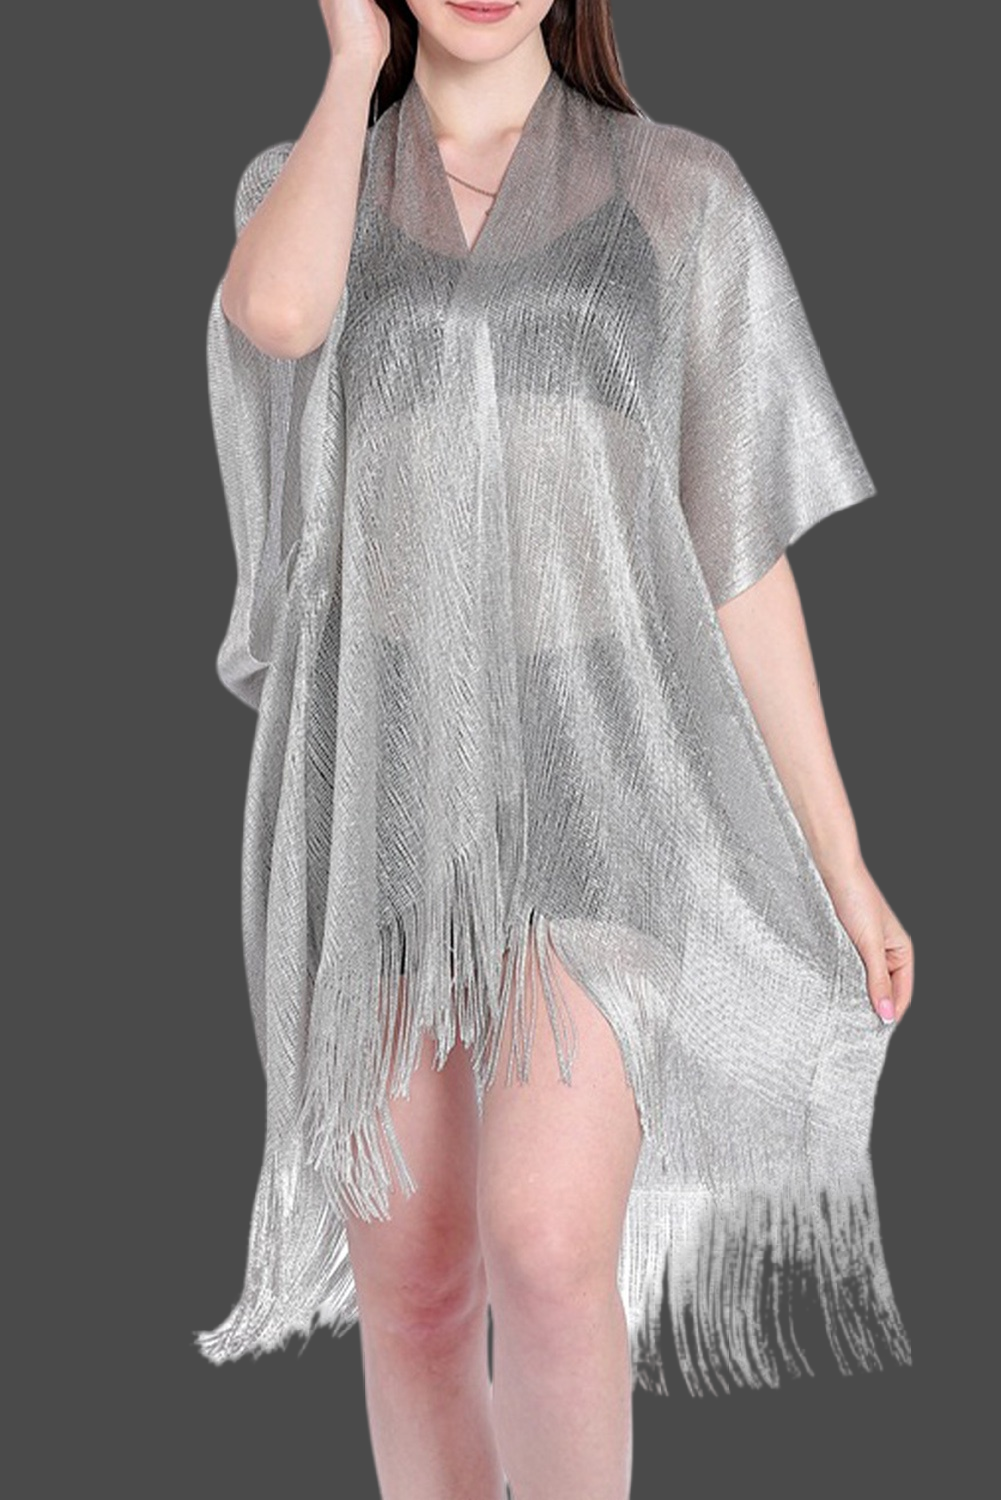 Gold Batwing Sleeve Tasseled Mesh Beach Cover Up - Babbazon Cover-ups